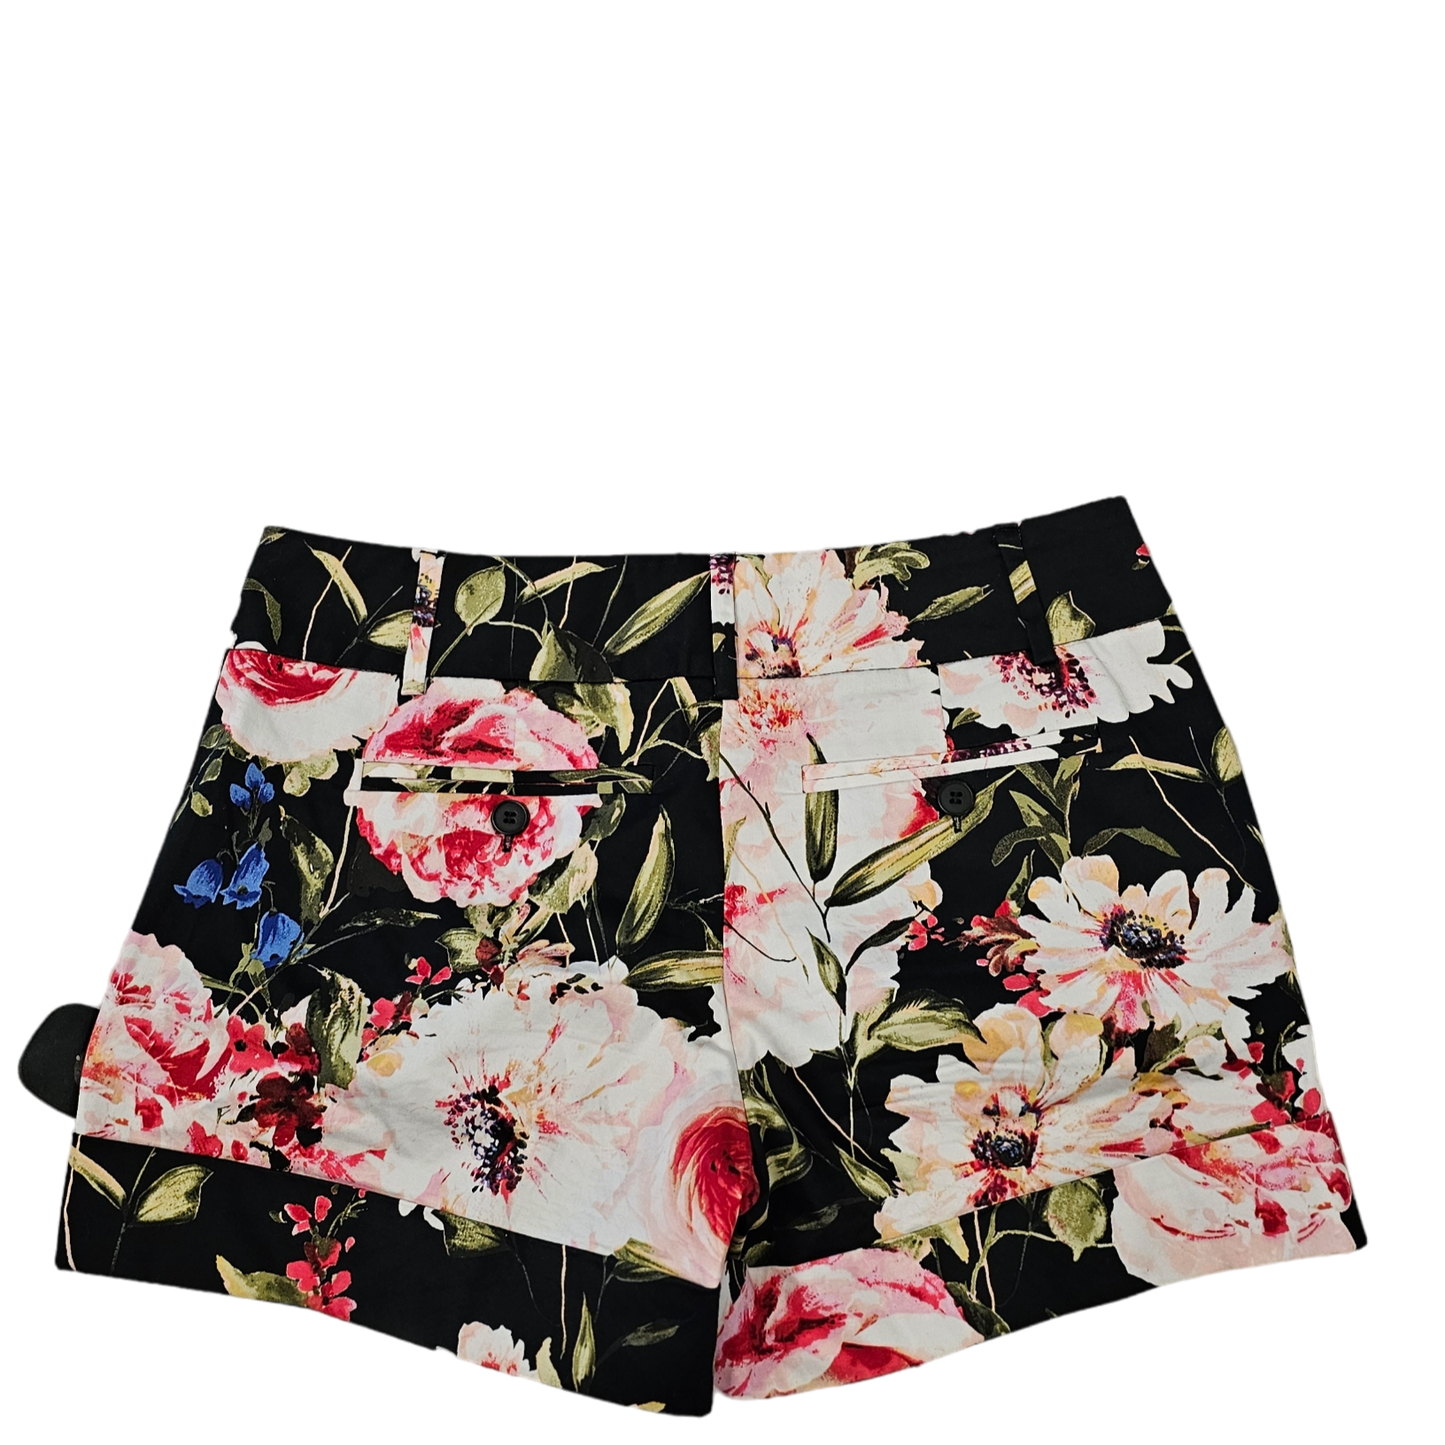 Shorts By New York And Co  Size: 2